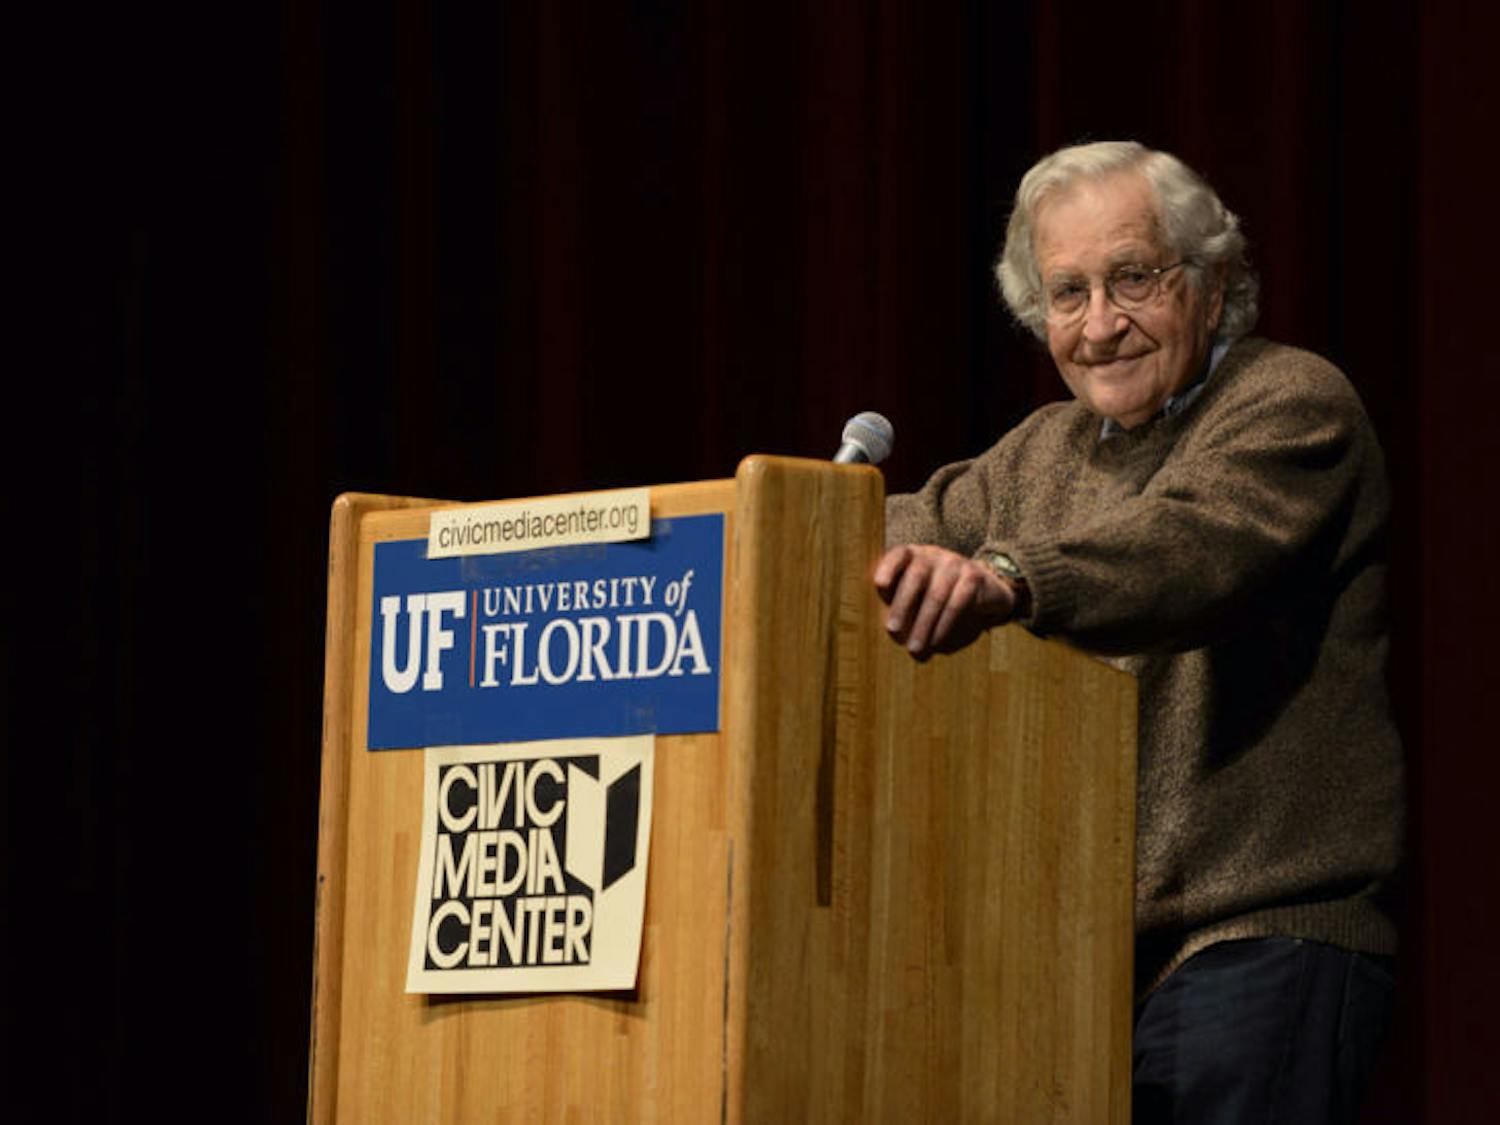 Noam Chomsky, a world-renowned linguist, philosopher, cognitive scientist and logician, delivers a special guest lecture Tuesday evening at the Phillips Center for the Performing Arts.